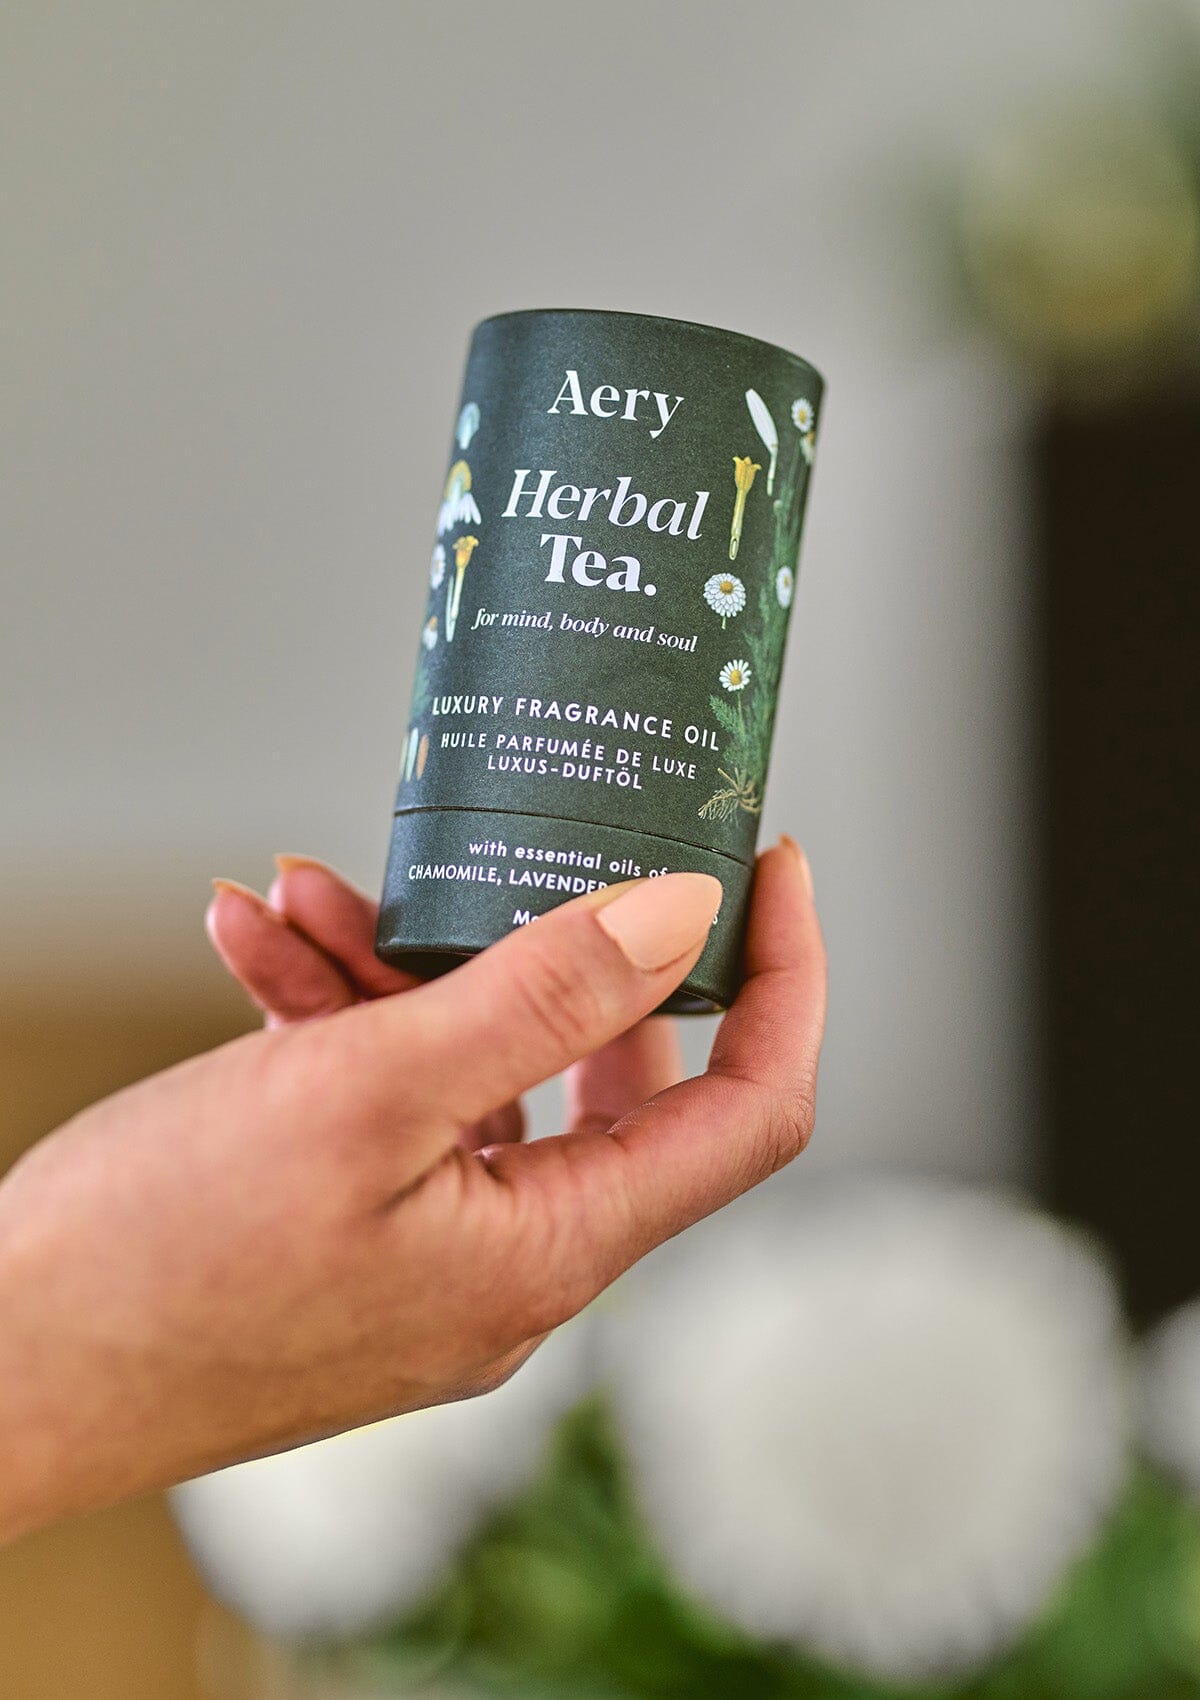 Green Herbal Tea fragrance oil product packaging by Aery displayed in hand 